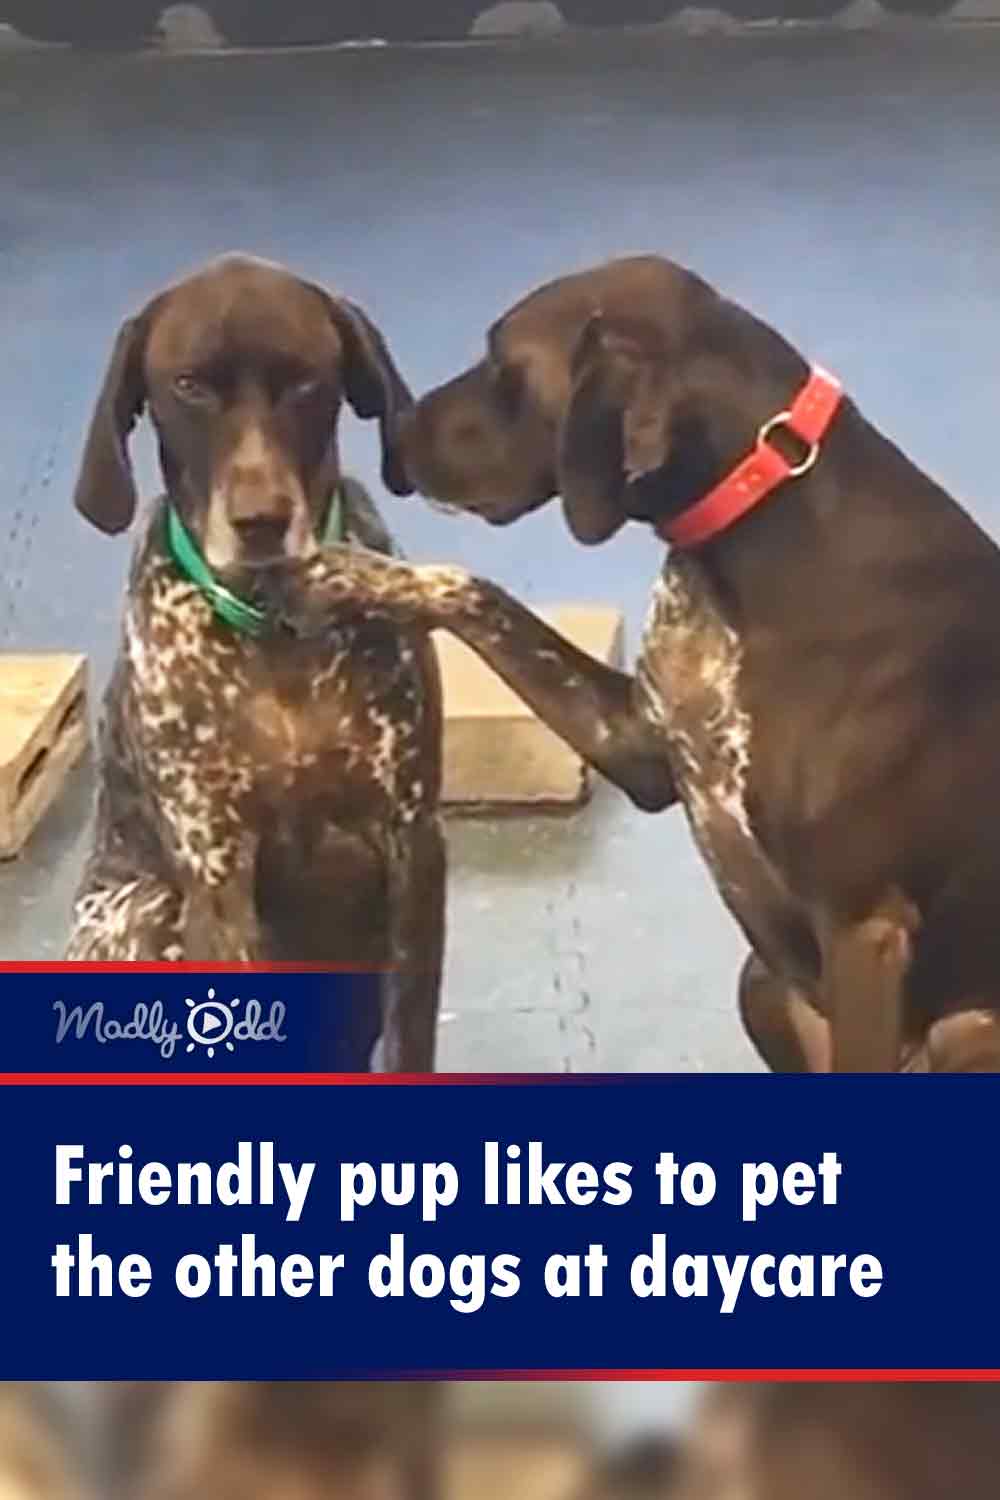 Friendly pup likes to pet the other dogs at daycare